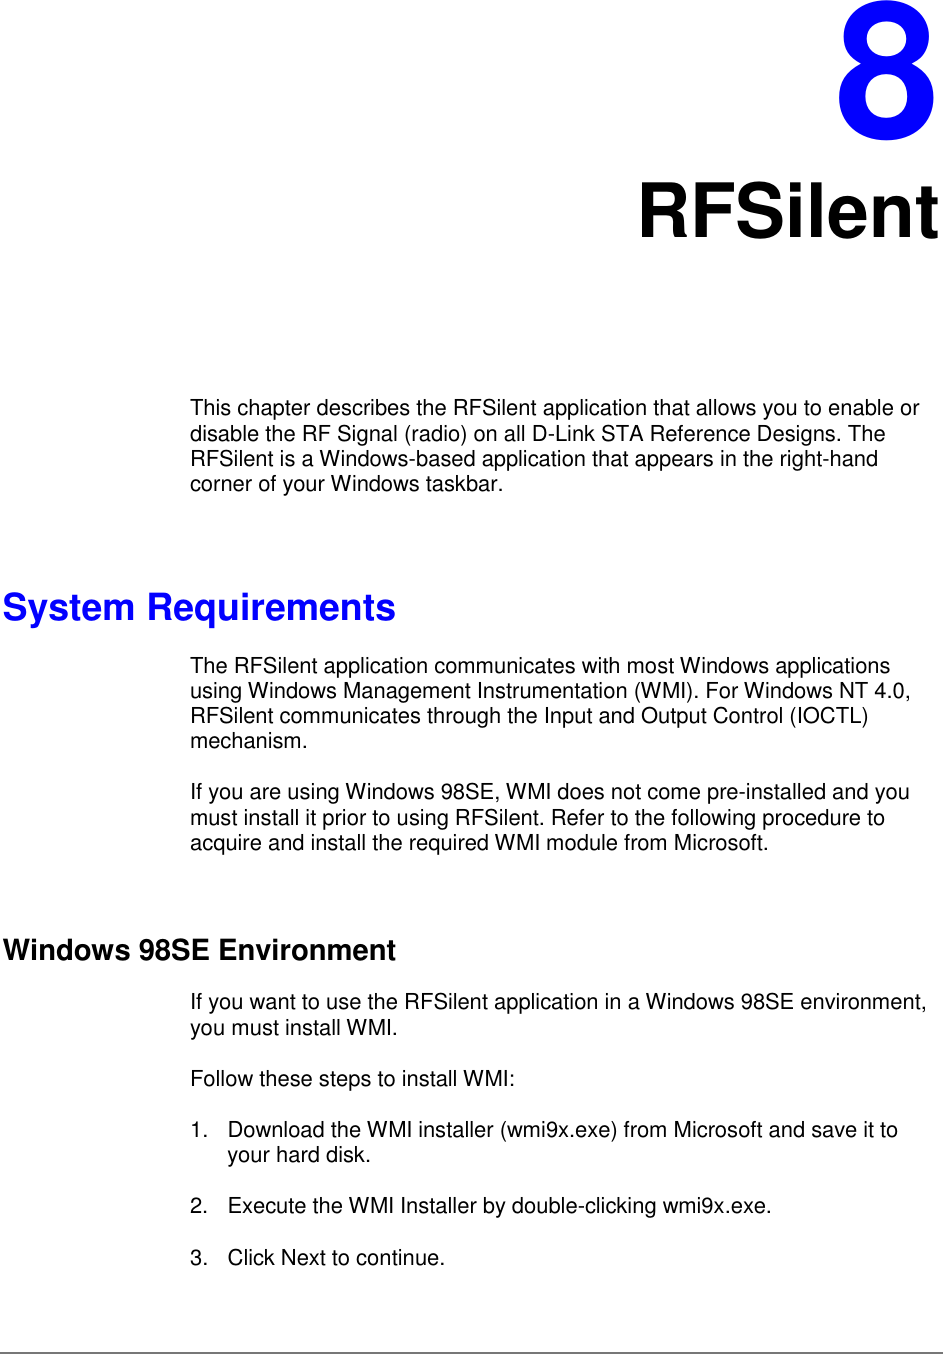 8RFSilentThis chapter describes the RFSilent application that allows you to enable ordisable the RF Signal (radio) on all D-Link STA Reference Designs. TheRFSilent is a Windows-based application that appears in the right-handcorner of your Windows taskbar.System RequirementsThe RFSilent application communicates with most Windows applicationsusing Windows Management Instrumentation (WMI). For Windows NT 4.0,RFSilent communicates through the Input and Output Control (IOCTL)mechanism.If you are using Windows 98SE, WMI does not come pre-installed and youmust install it prior to using RFSilent. Refer to the following procedure toacquire and install the required WMI module from Microsoft.Windows 98SE EnvironmentIf you want to use the RFSilent application in a Windows 98SE environment,you must install WMI.Follow these steps to install WMI:1.  Download the WMI installer (wmi9x.exe) from Microsoft and save it toyour hard disk.2.  Execute the WMI Installer by double-clicking wmi9x.exe.3.  Click Next to continue.